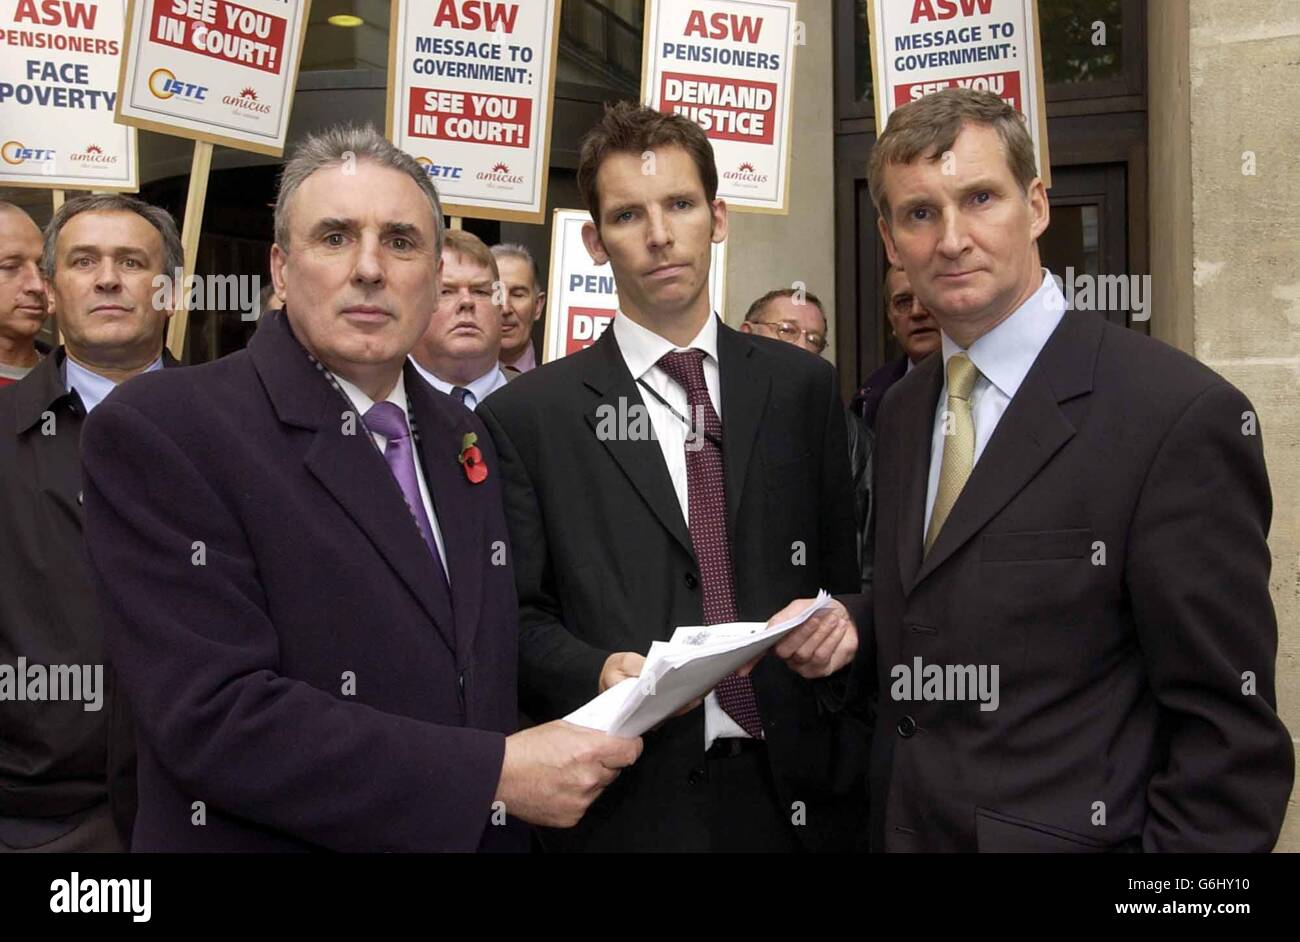 ISTC General Secretary Michael Leahy (left) and Amicus Assistant General Secretary Paul Talbot (right) outside Richmond House, Whitehall accompanied by former ASW workers, as they deliver a writ to the Department of Work and Pensions headquarters in London. The unprecedented action is being taken in support of 1,000 workers who lost their jobs earlier this year when steel firm ASW, which had factories in Cardiff and Sheerness, Kent, fell into receivership. Stock Photo